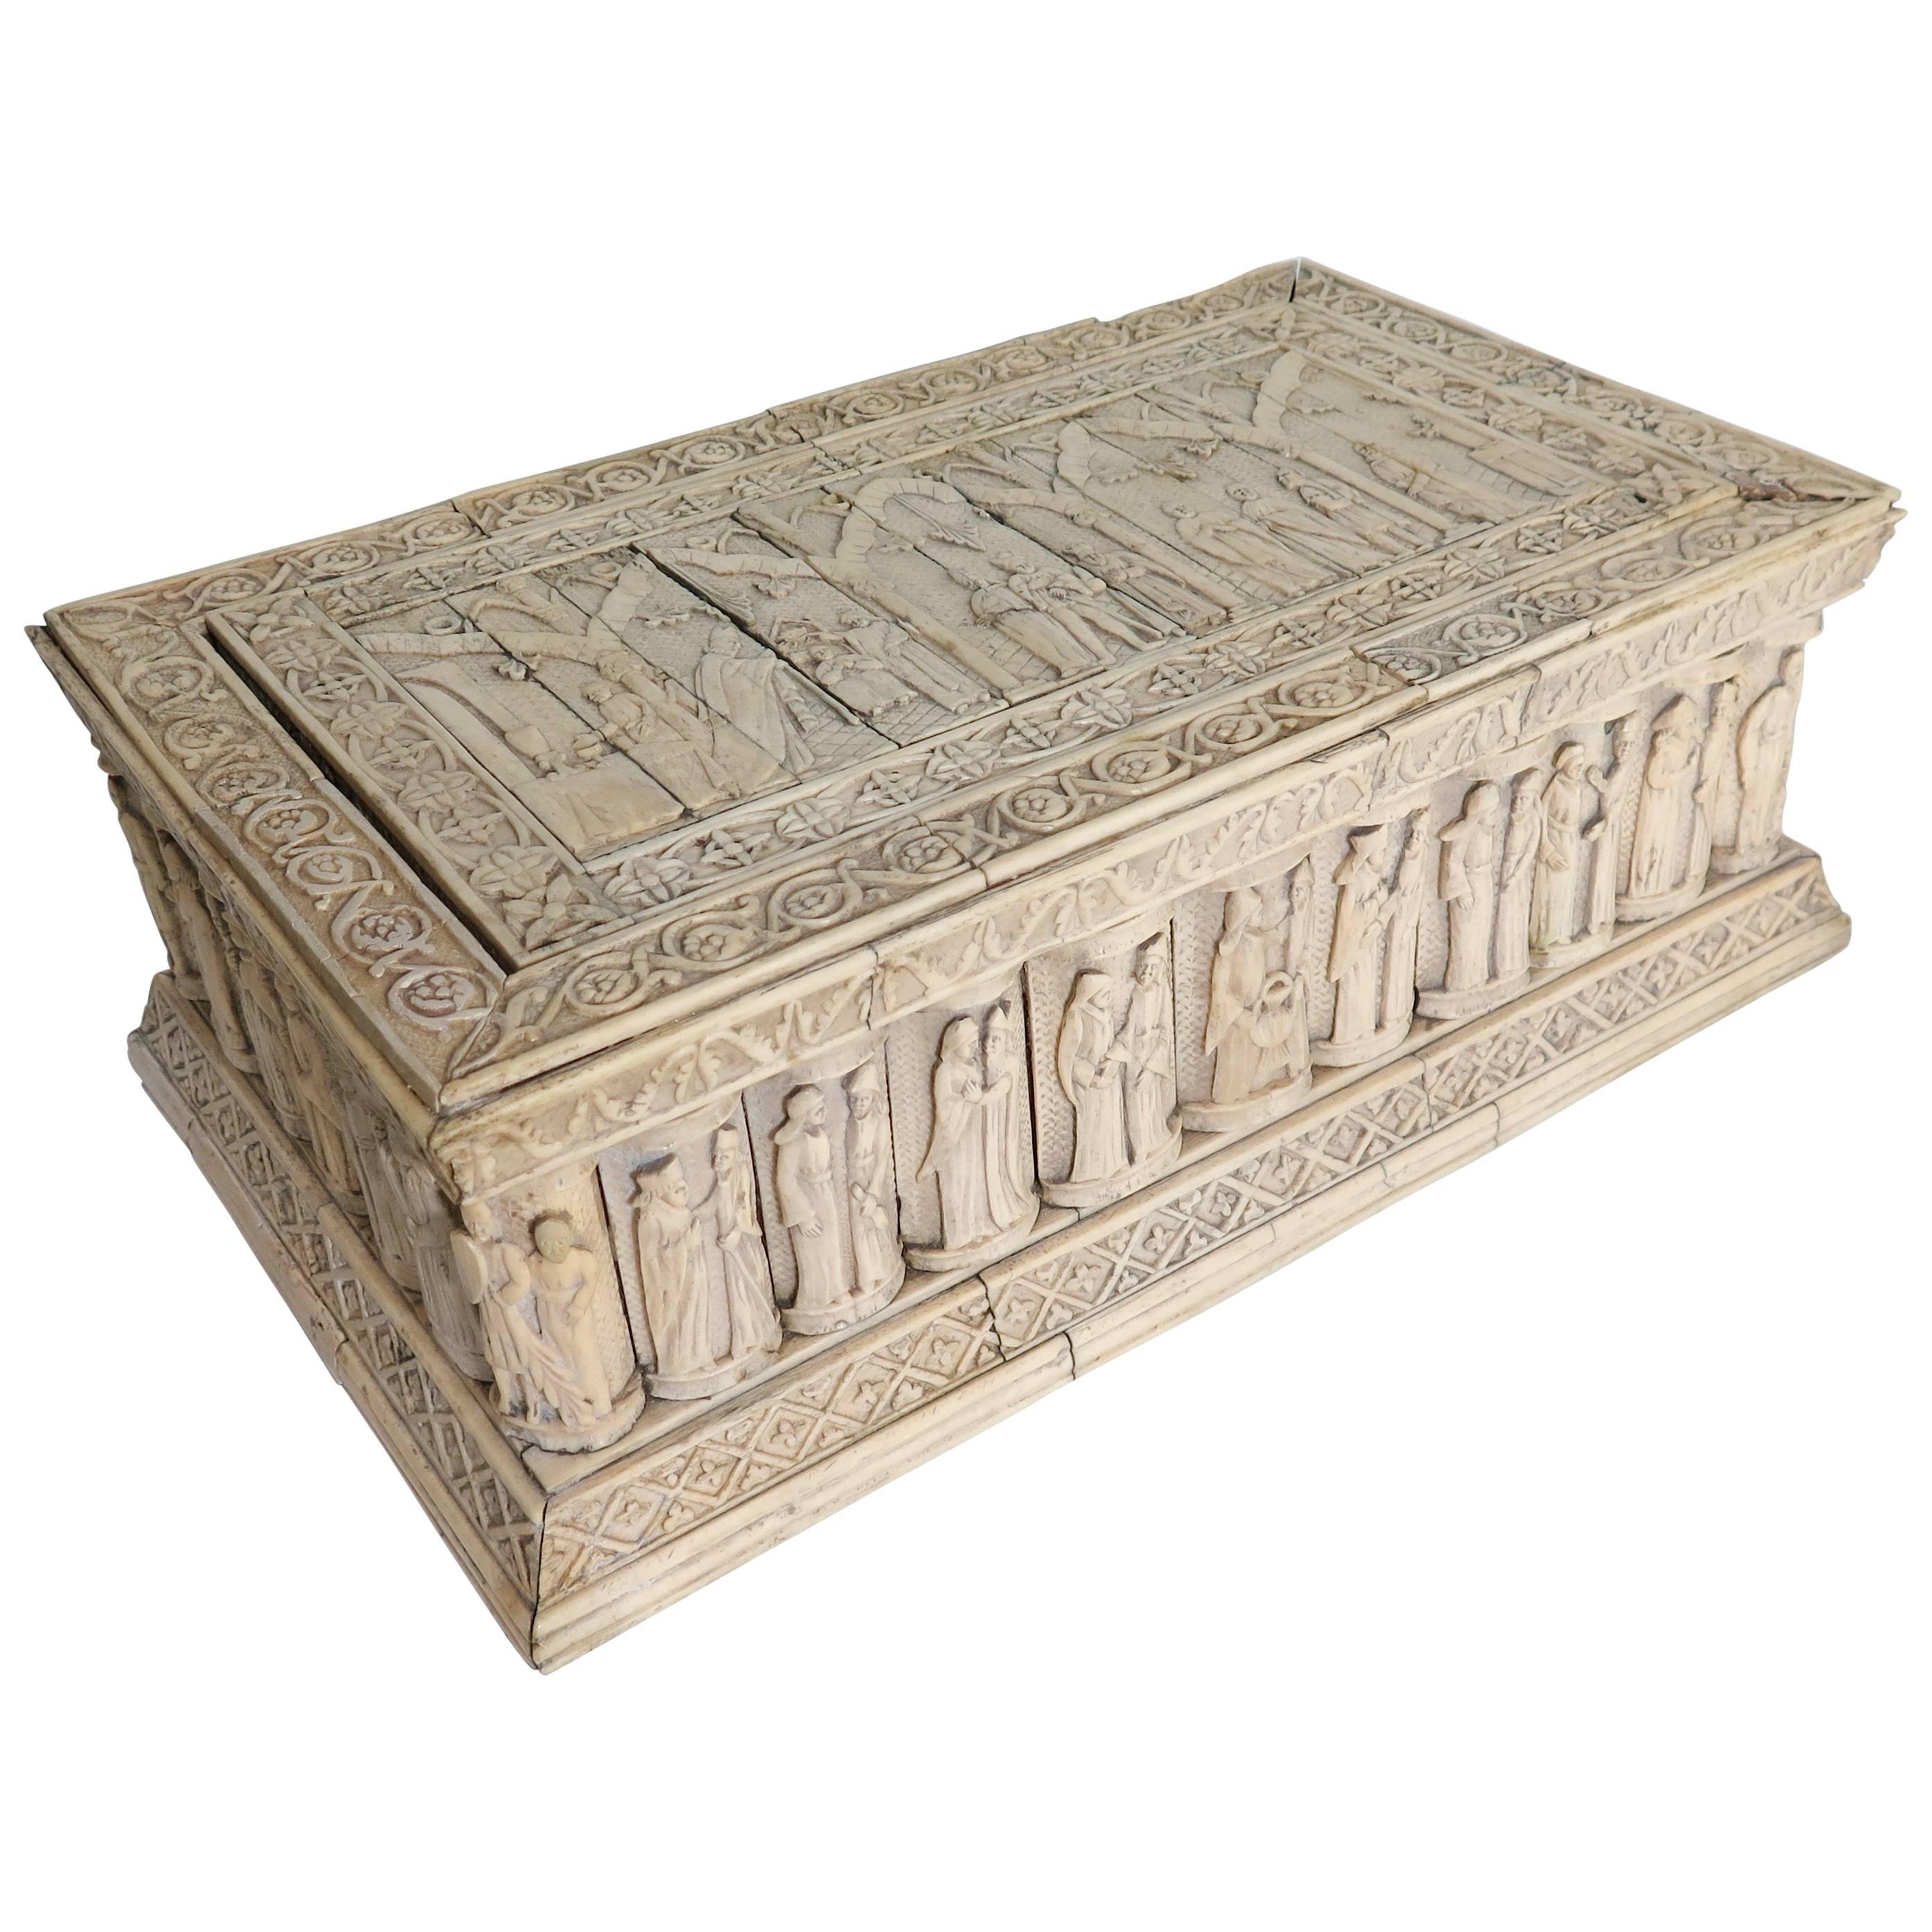 Italian Bone Carved Embriachi Marriage Casket For Sale